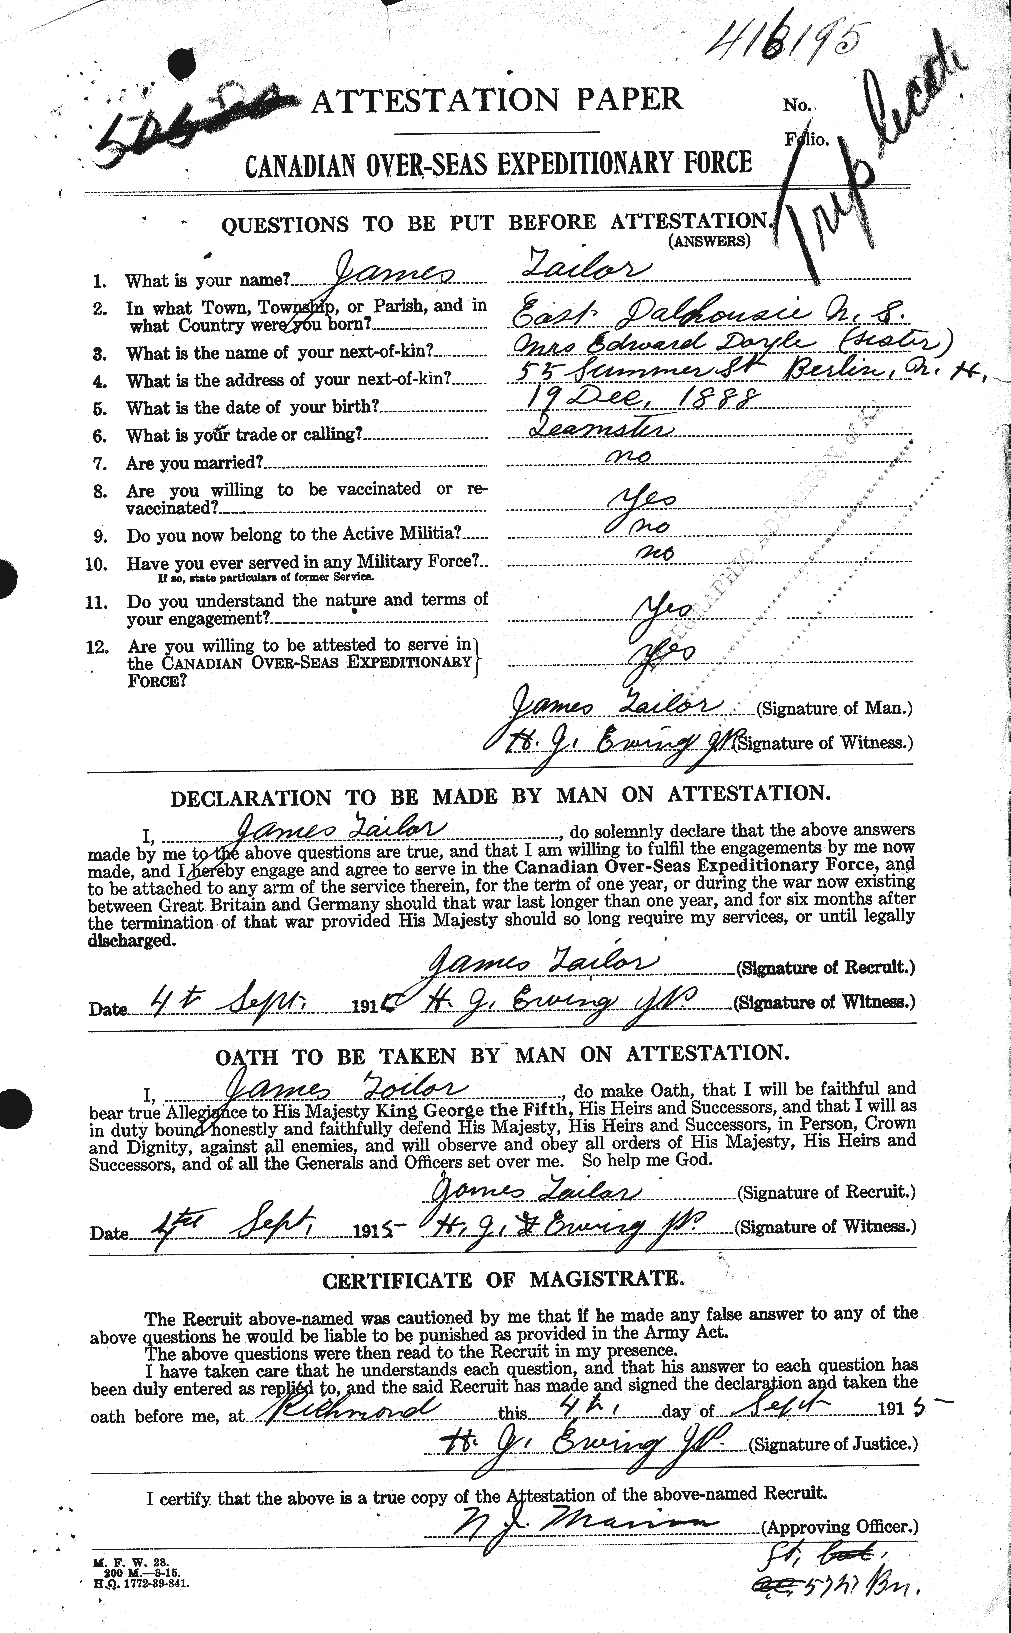 Personnel Records of the First World War - CEF 127181a